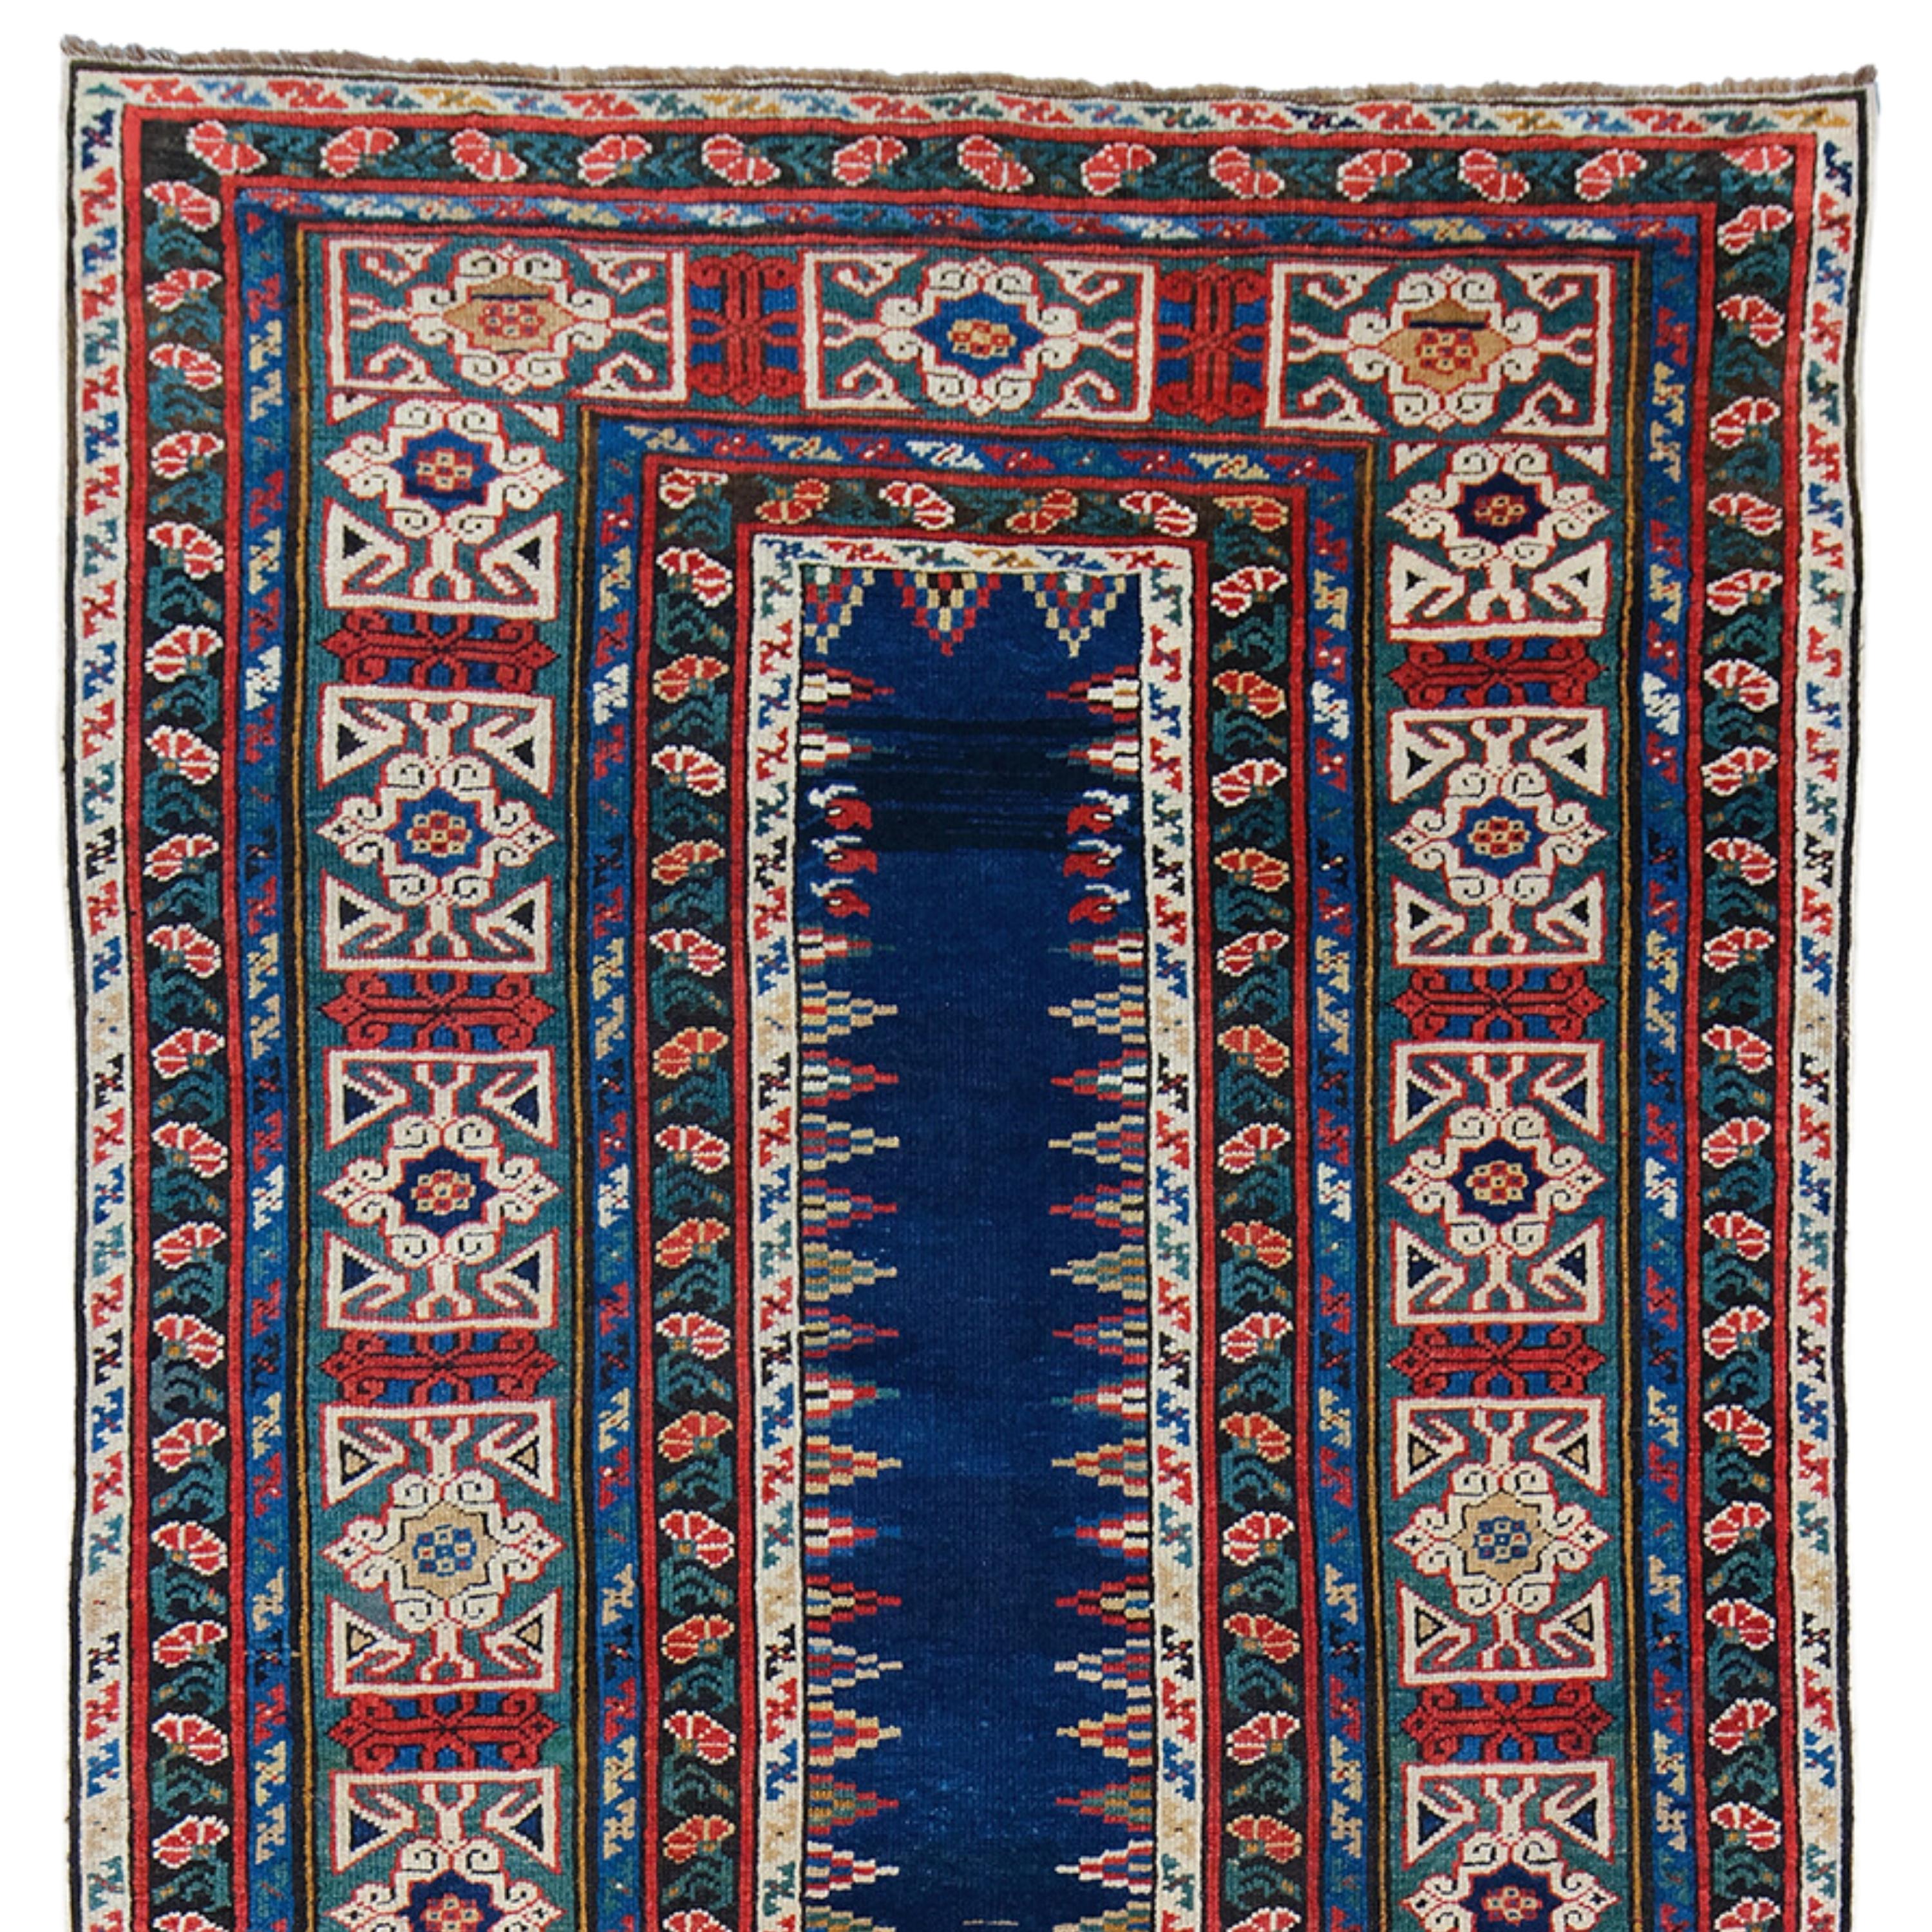 19th Century Caucasian Rug - Handmade Wool Rug

An excellent choice for decorating your dream home, this antique carpet was woven in the Kuba region of the Caucasus in the late 19th century. This region is known as one of the most important centers